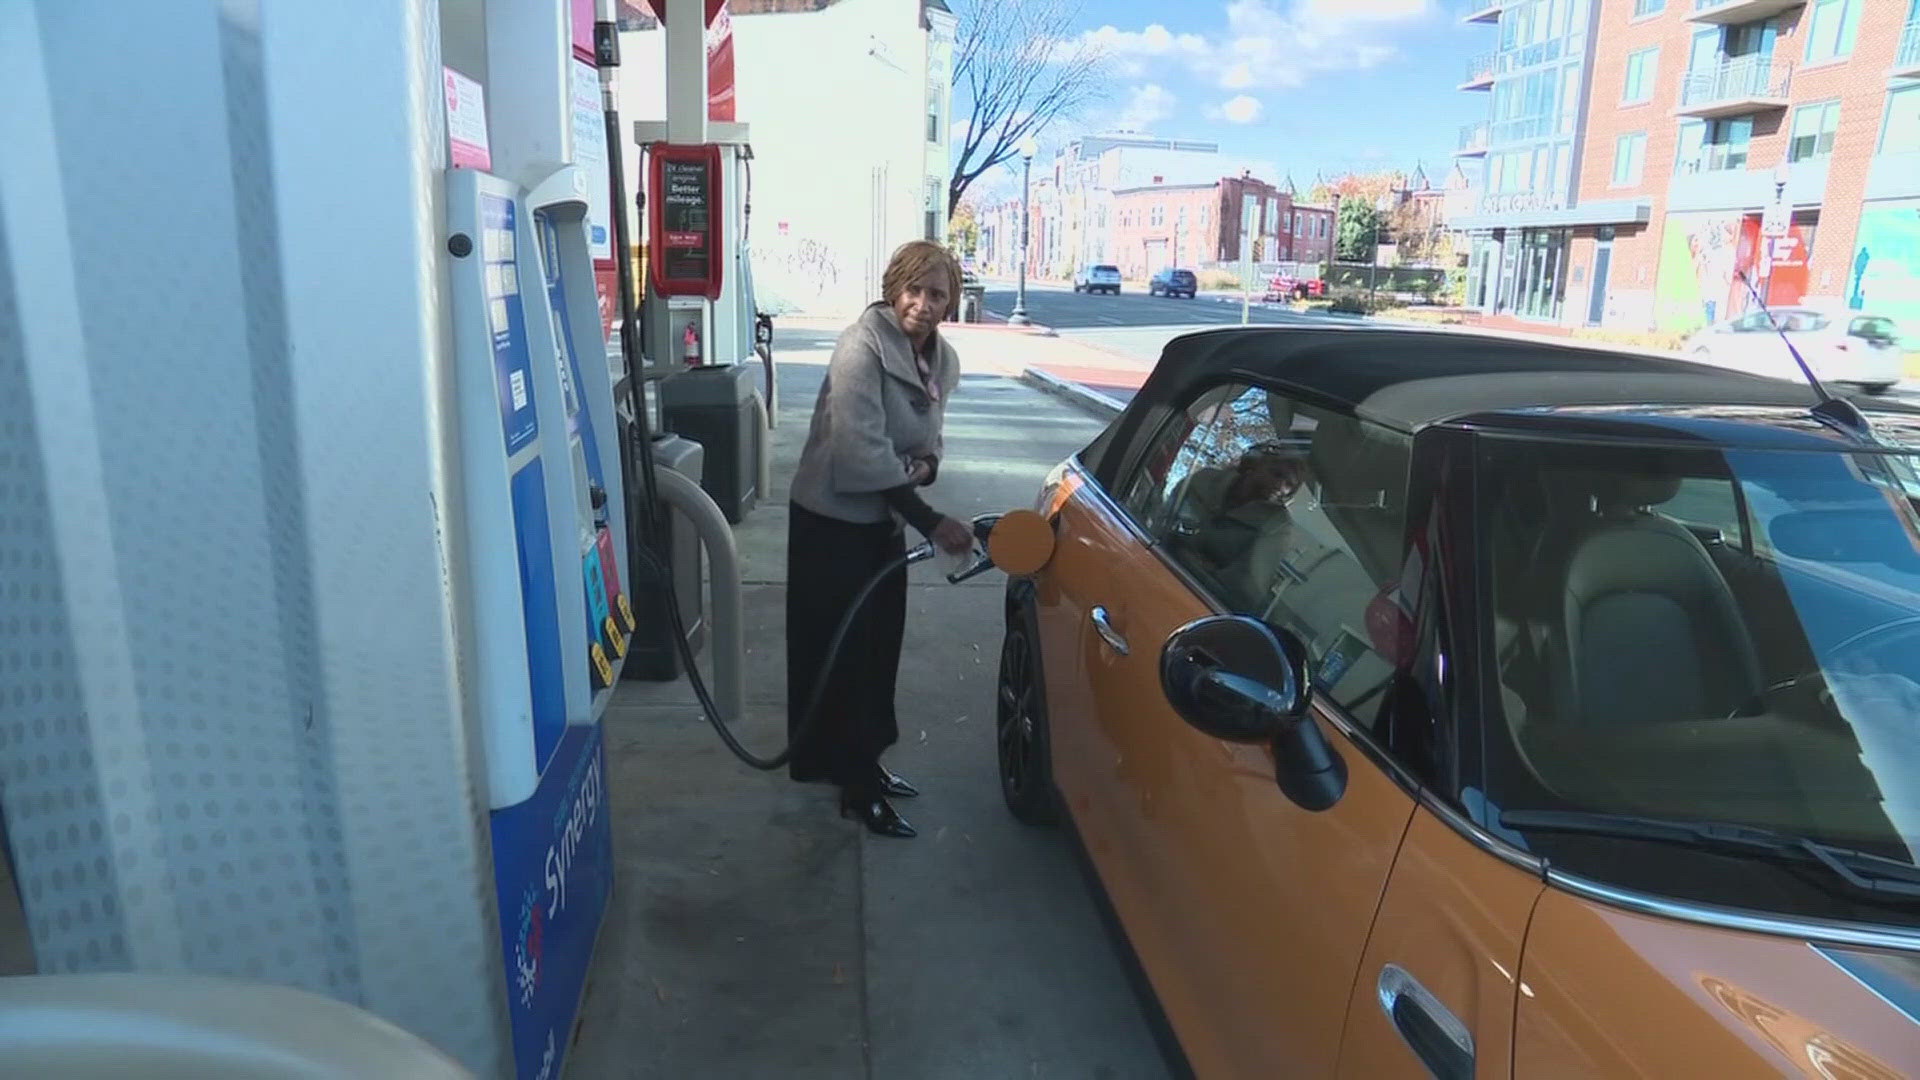 Tuesday, the Biden administration is moving to lower gas prices heading into summer.